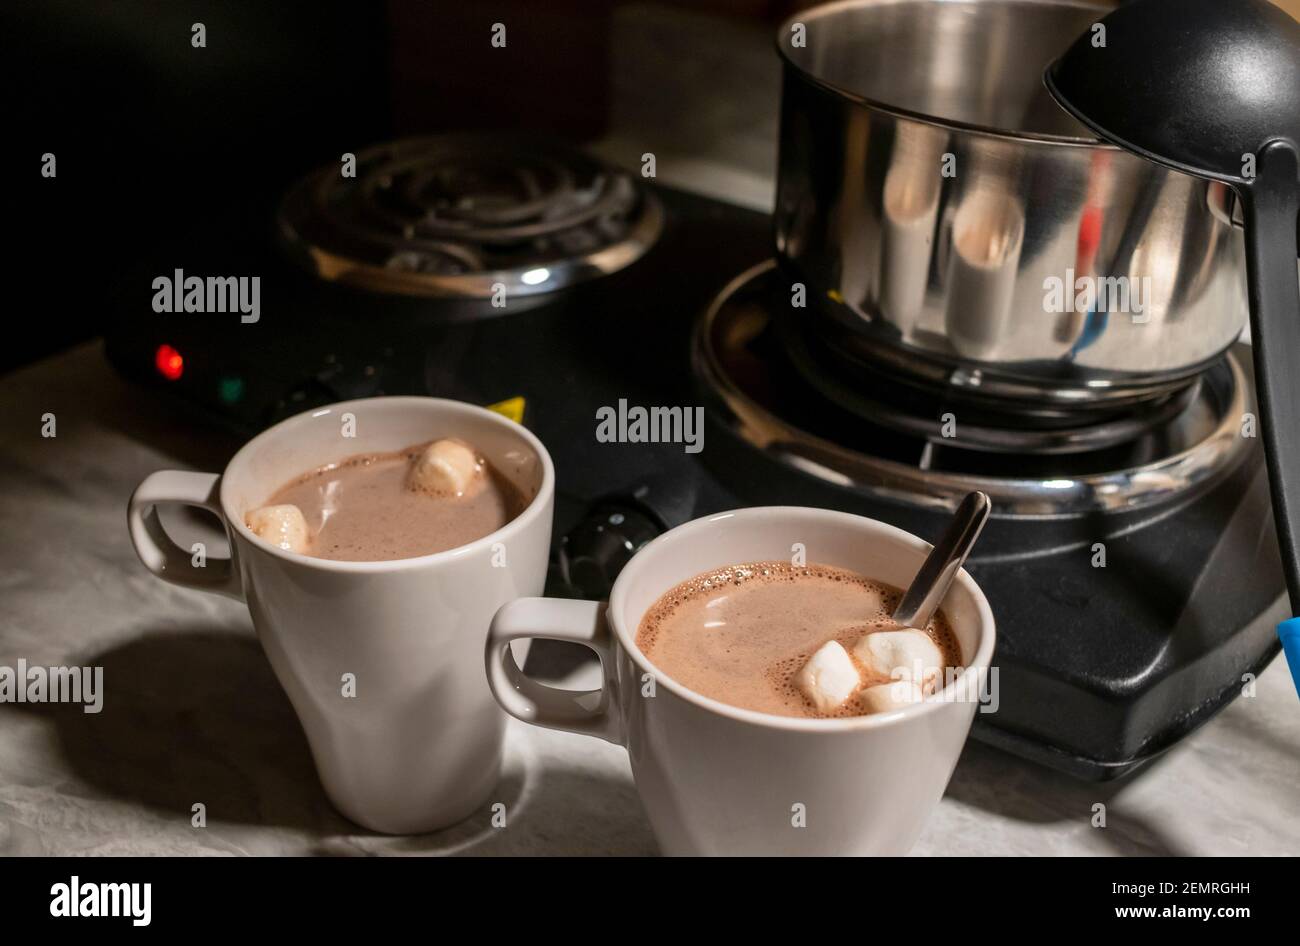 Two hot chocolate cups in front a portable electric burner stove at night Stock Photo